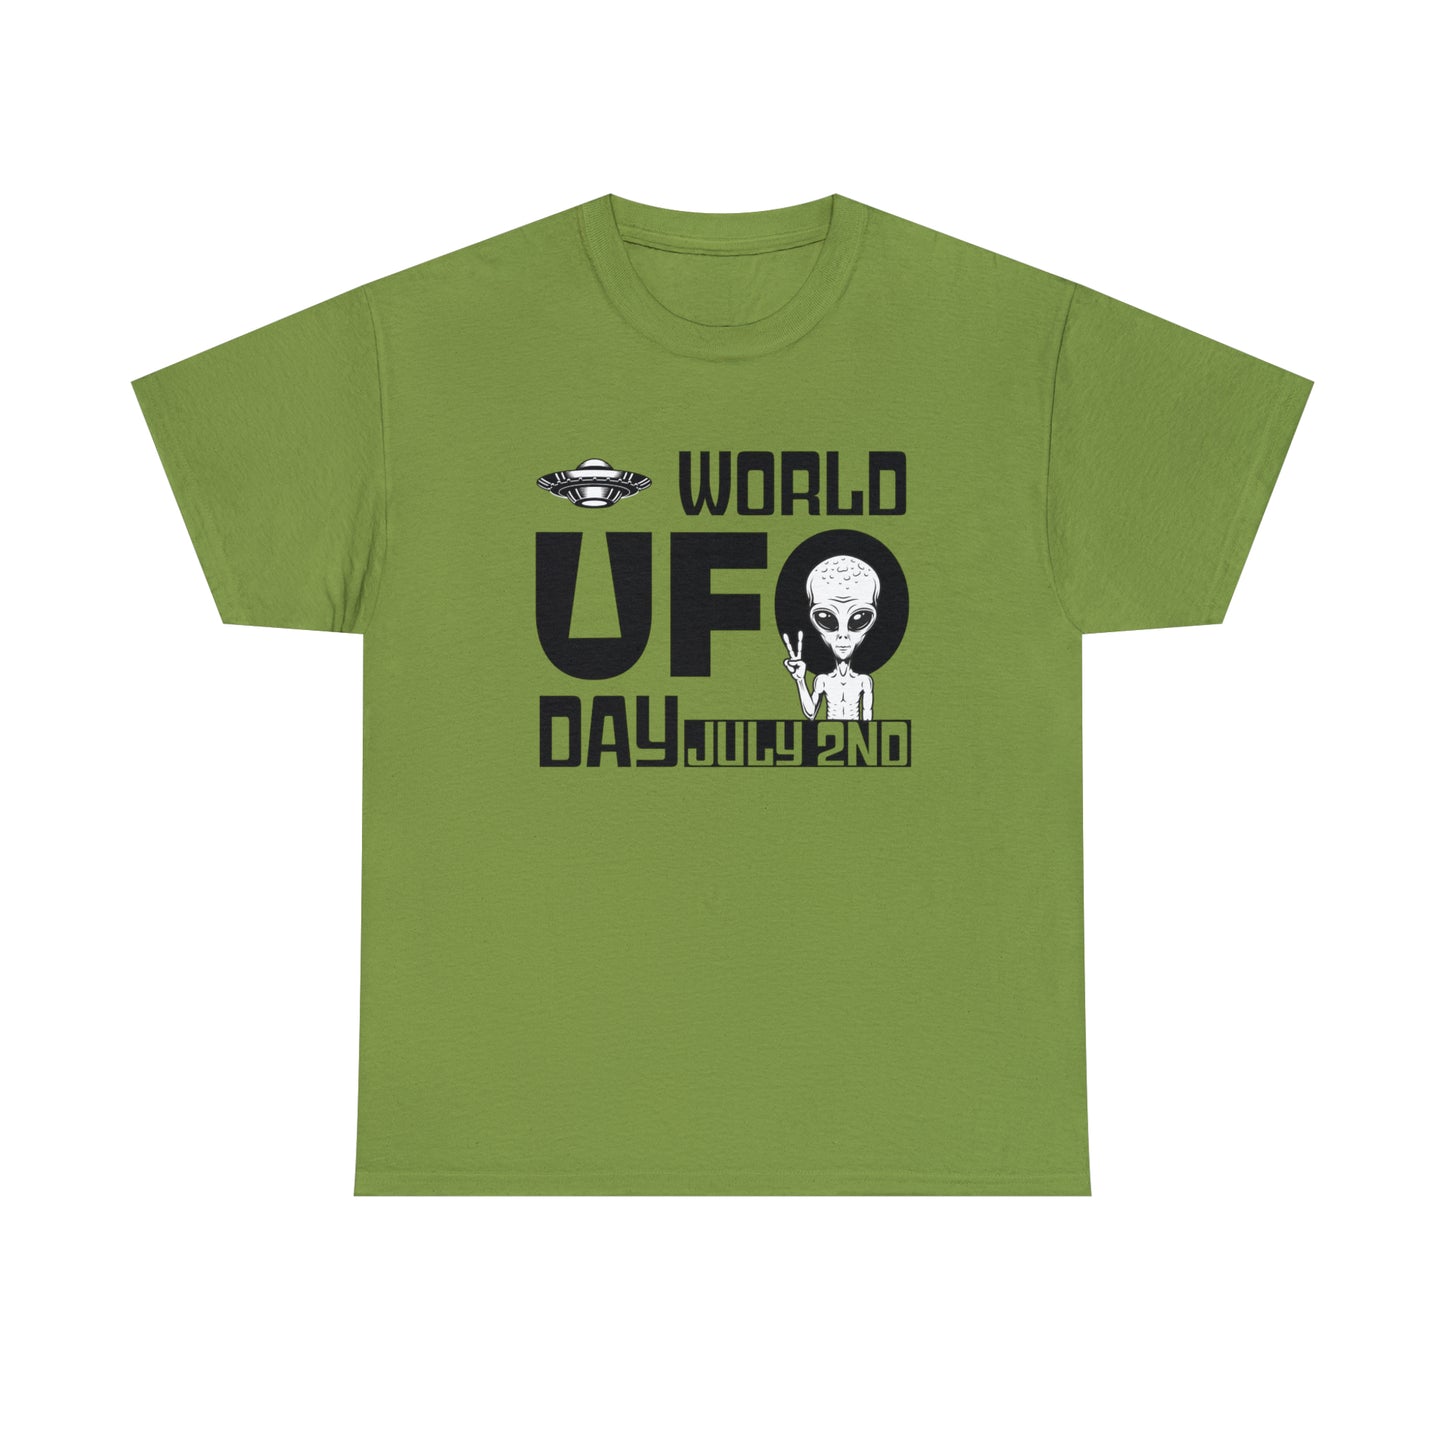 UFO T-Shirt For World UFO Day T Shirt For Alien T Shirt For Funny Extraterrestrial Shirt